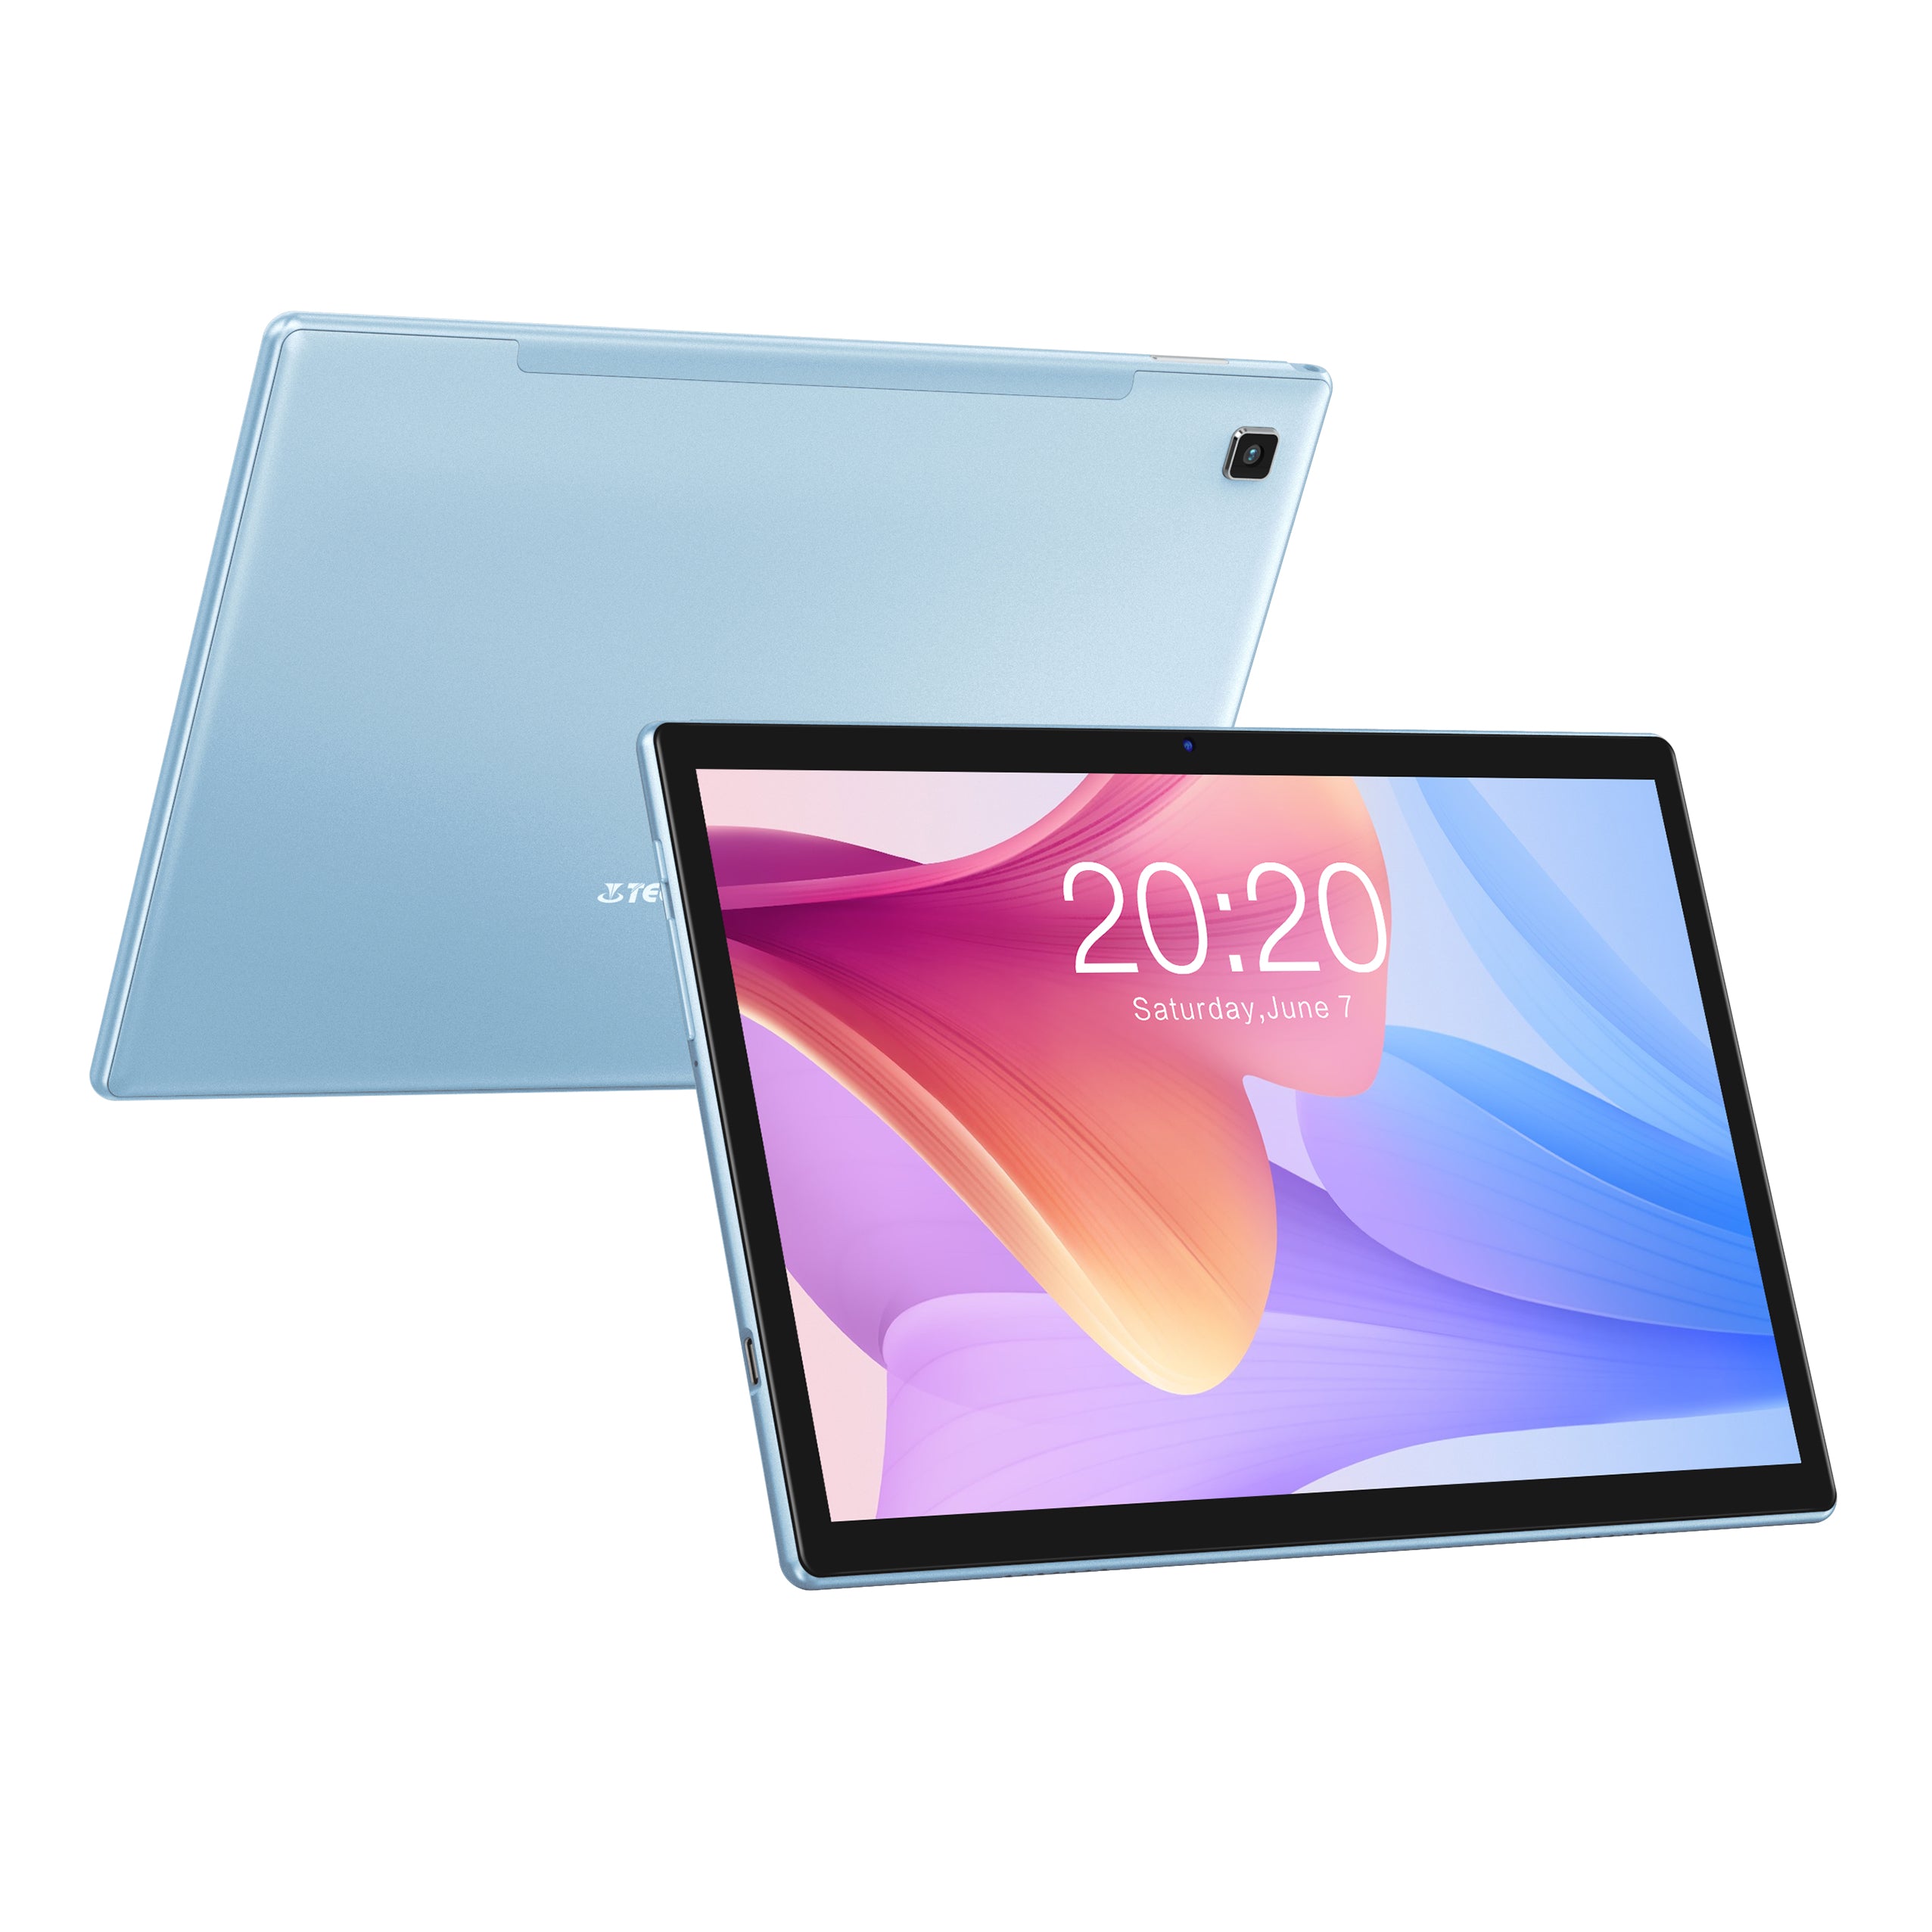 P20S Tablet